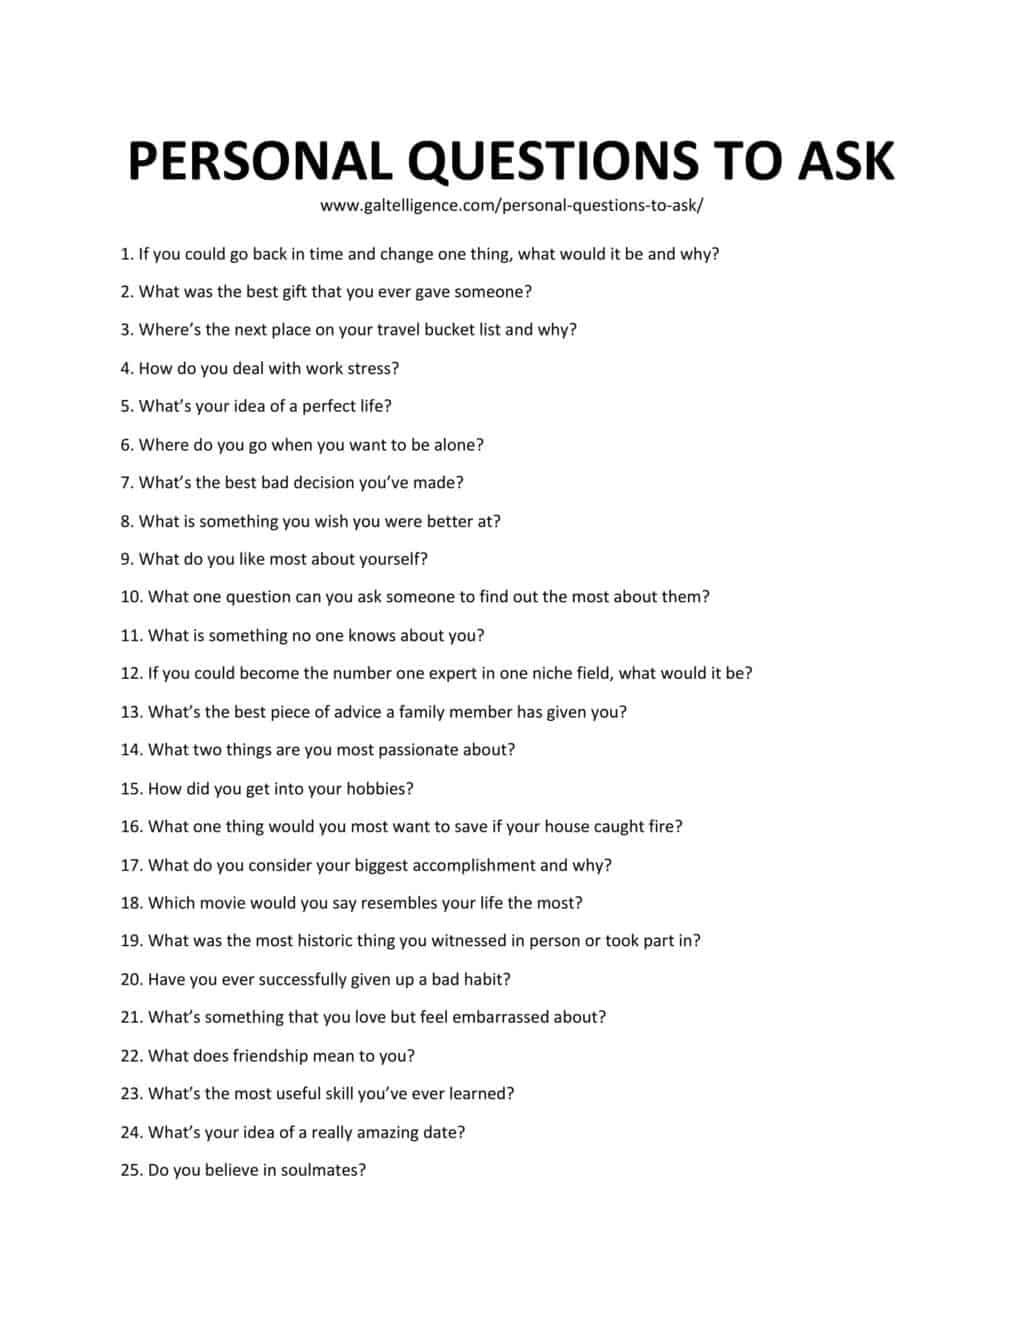 PERSONAL QUESTIONS TO ASK 11 